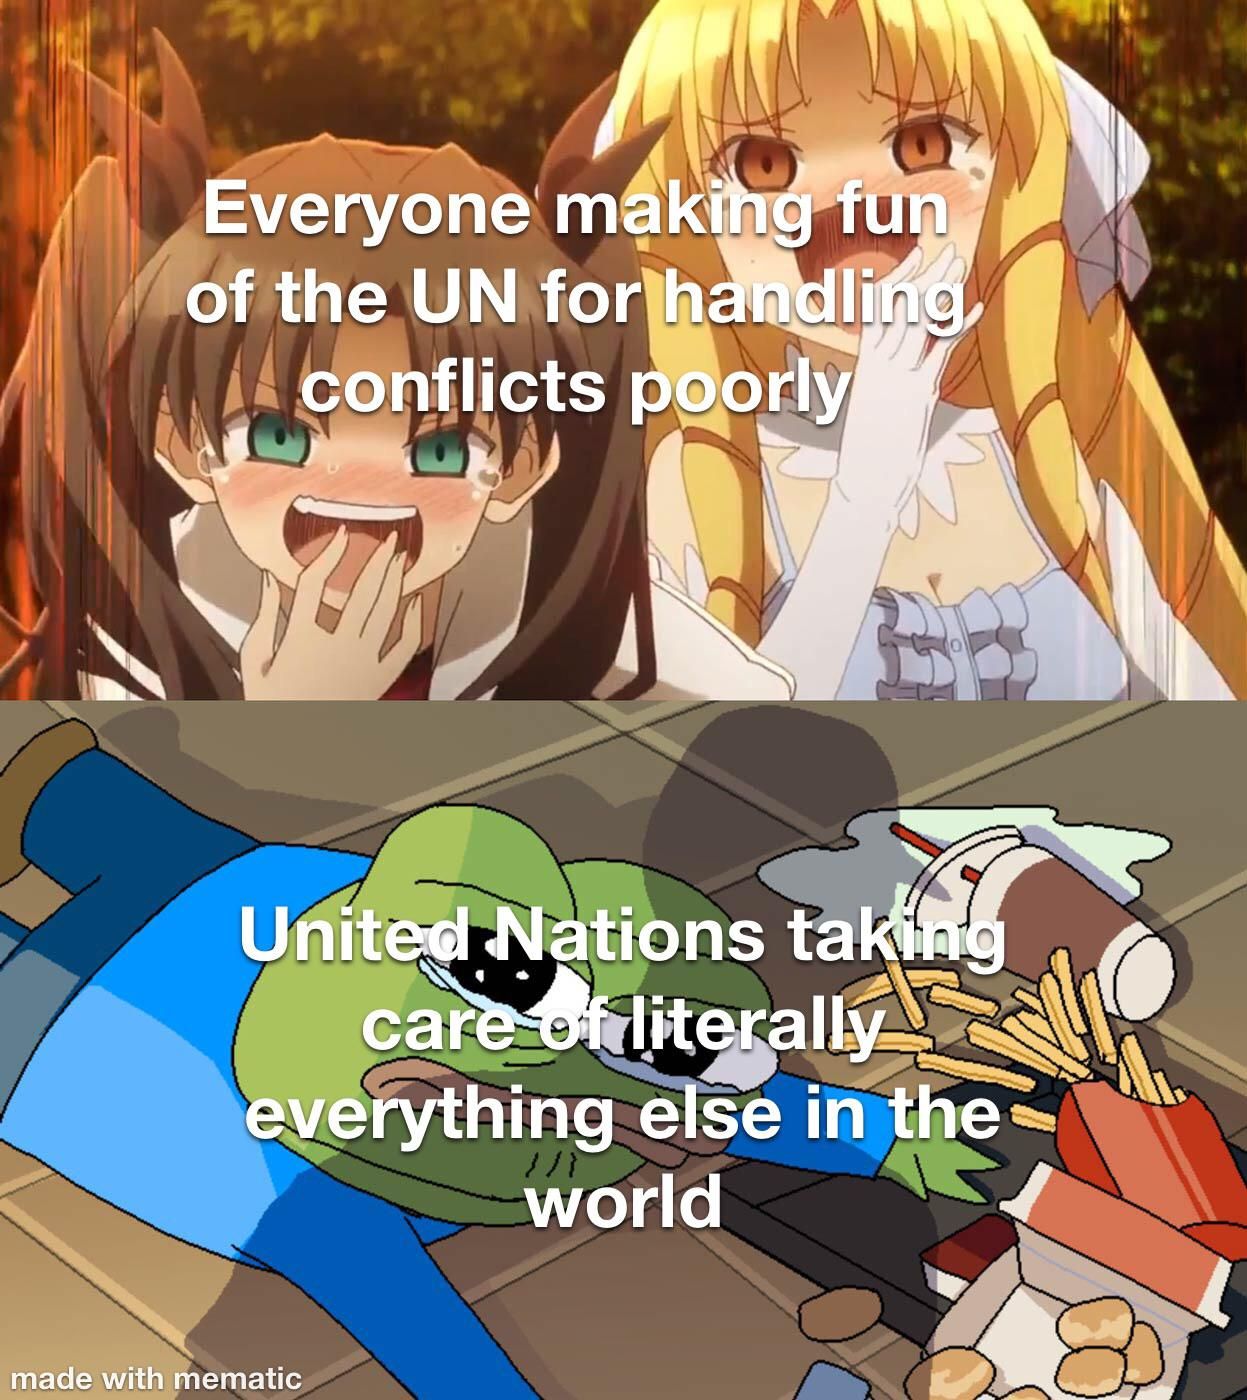 Shoutout to all the other UN organizations